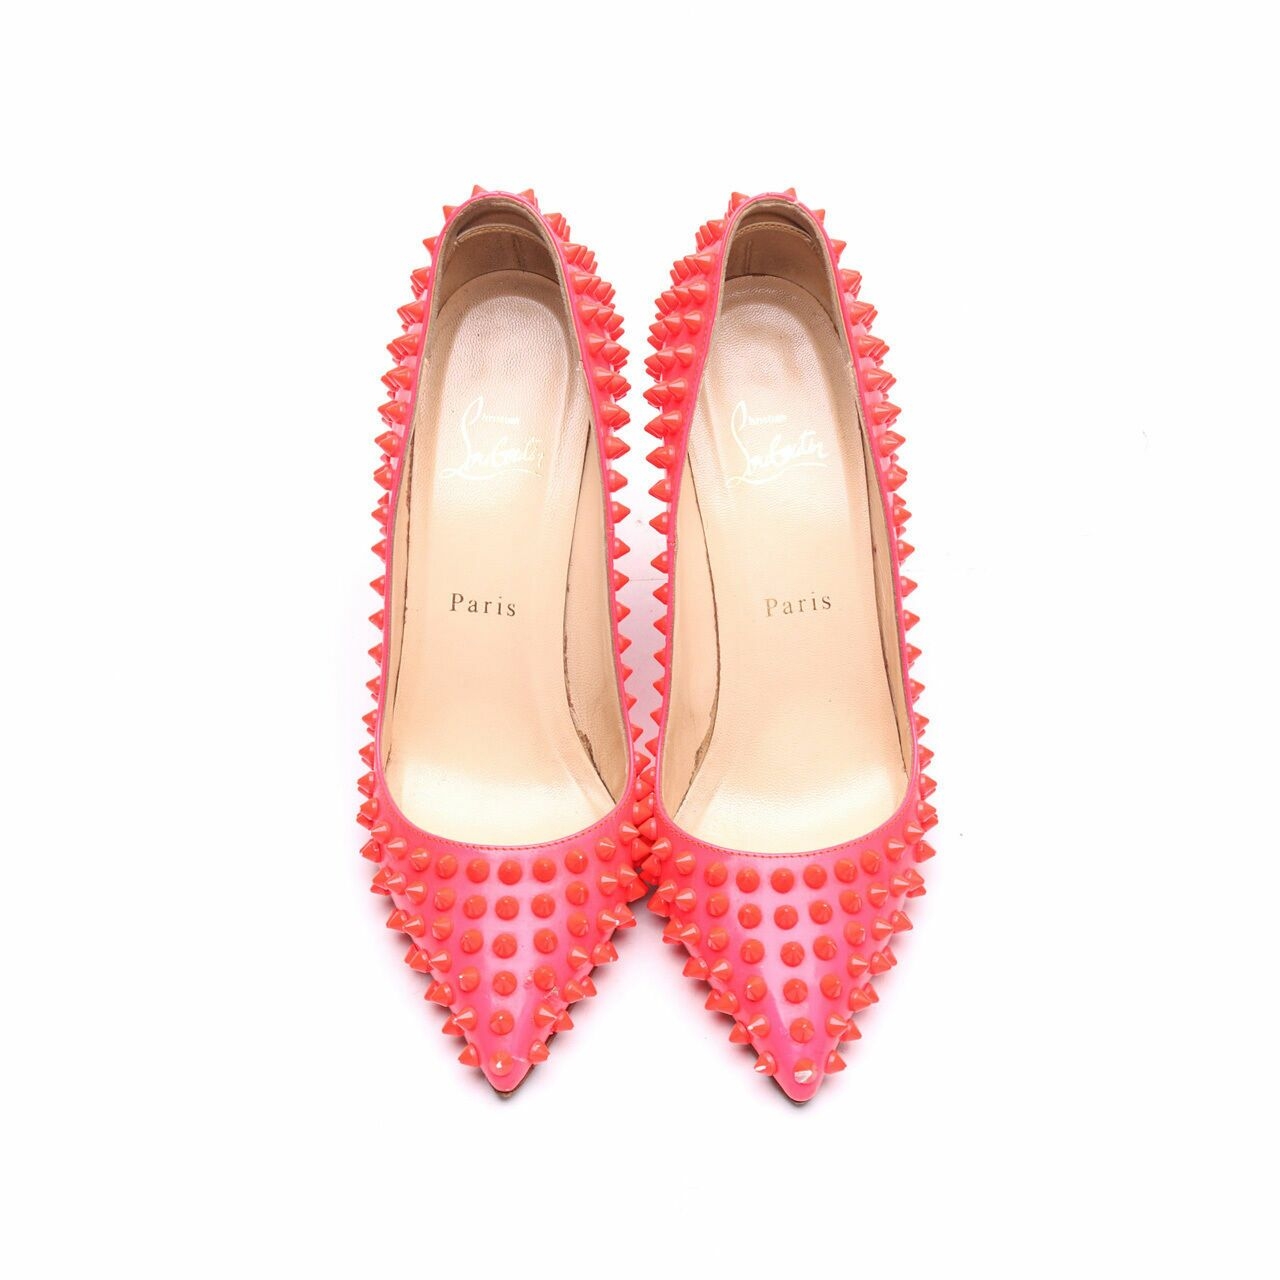 Christian Louboutin Neon Coral Patent Leather Pigalle Spikes Pump Heels